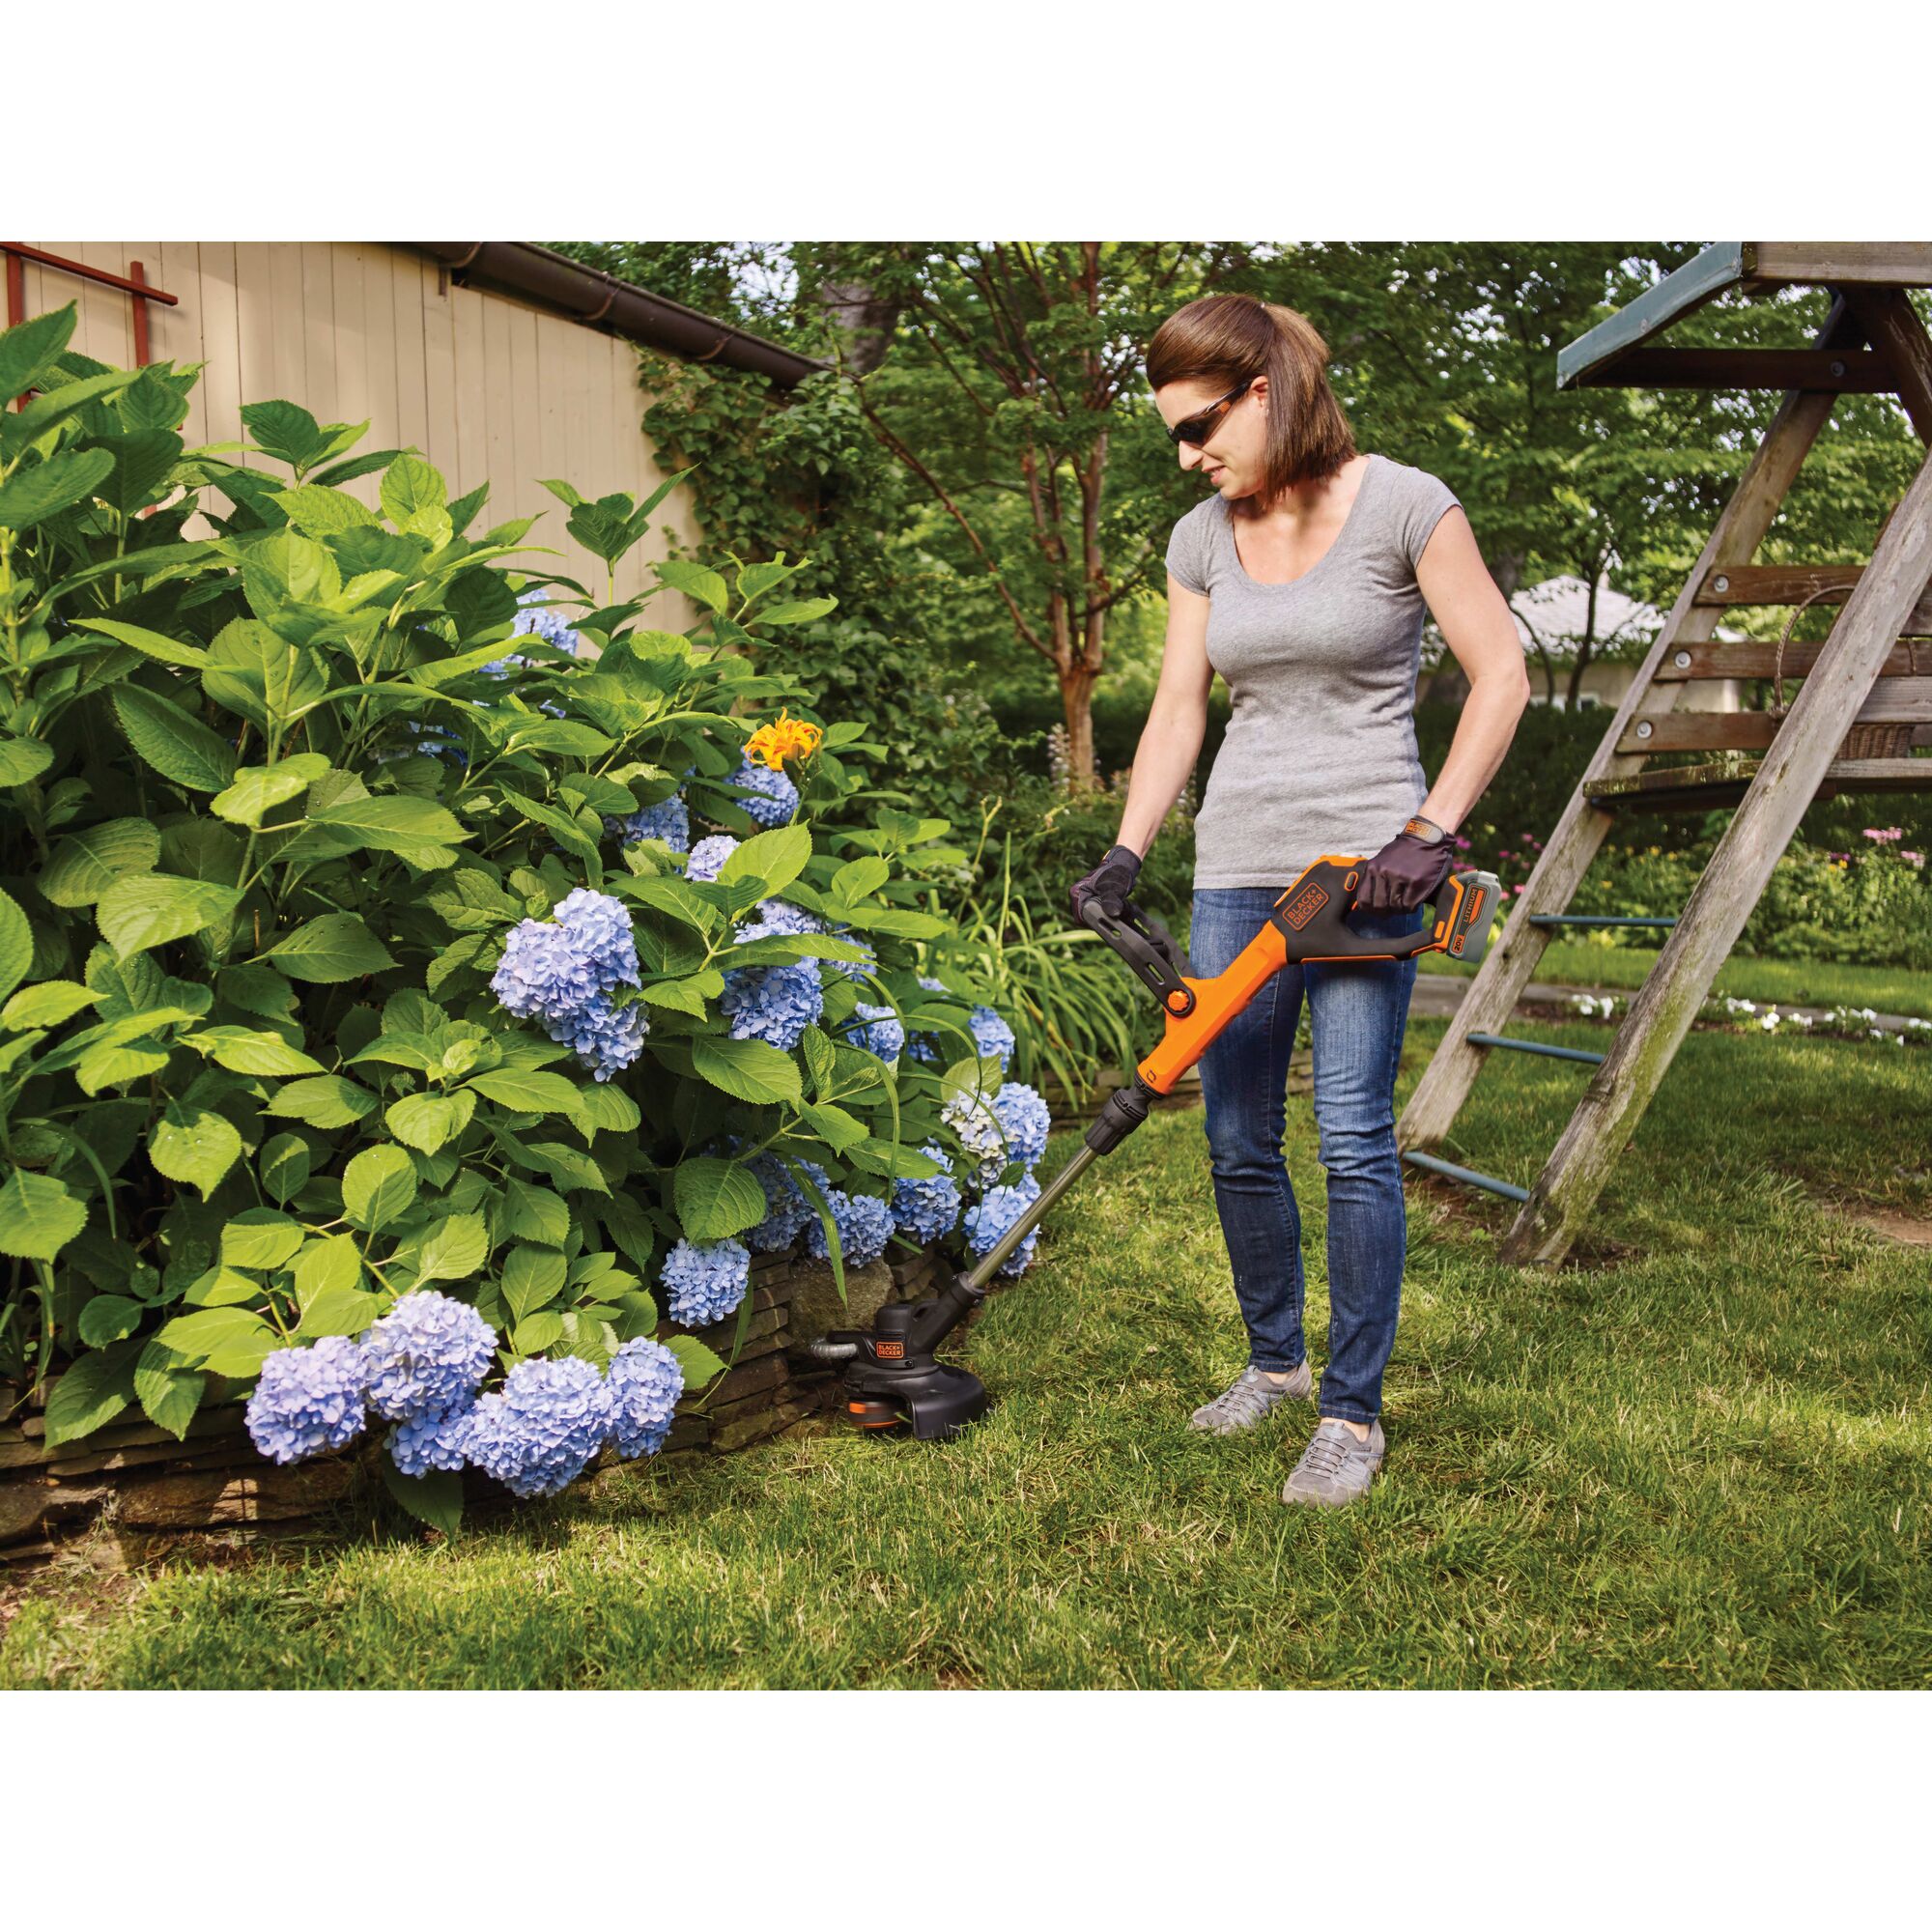 Woman using 20V Max Lithium Easyfeed string Trimmer/Edger near a garden and playset.